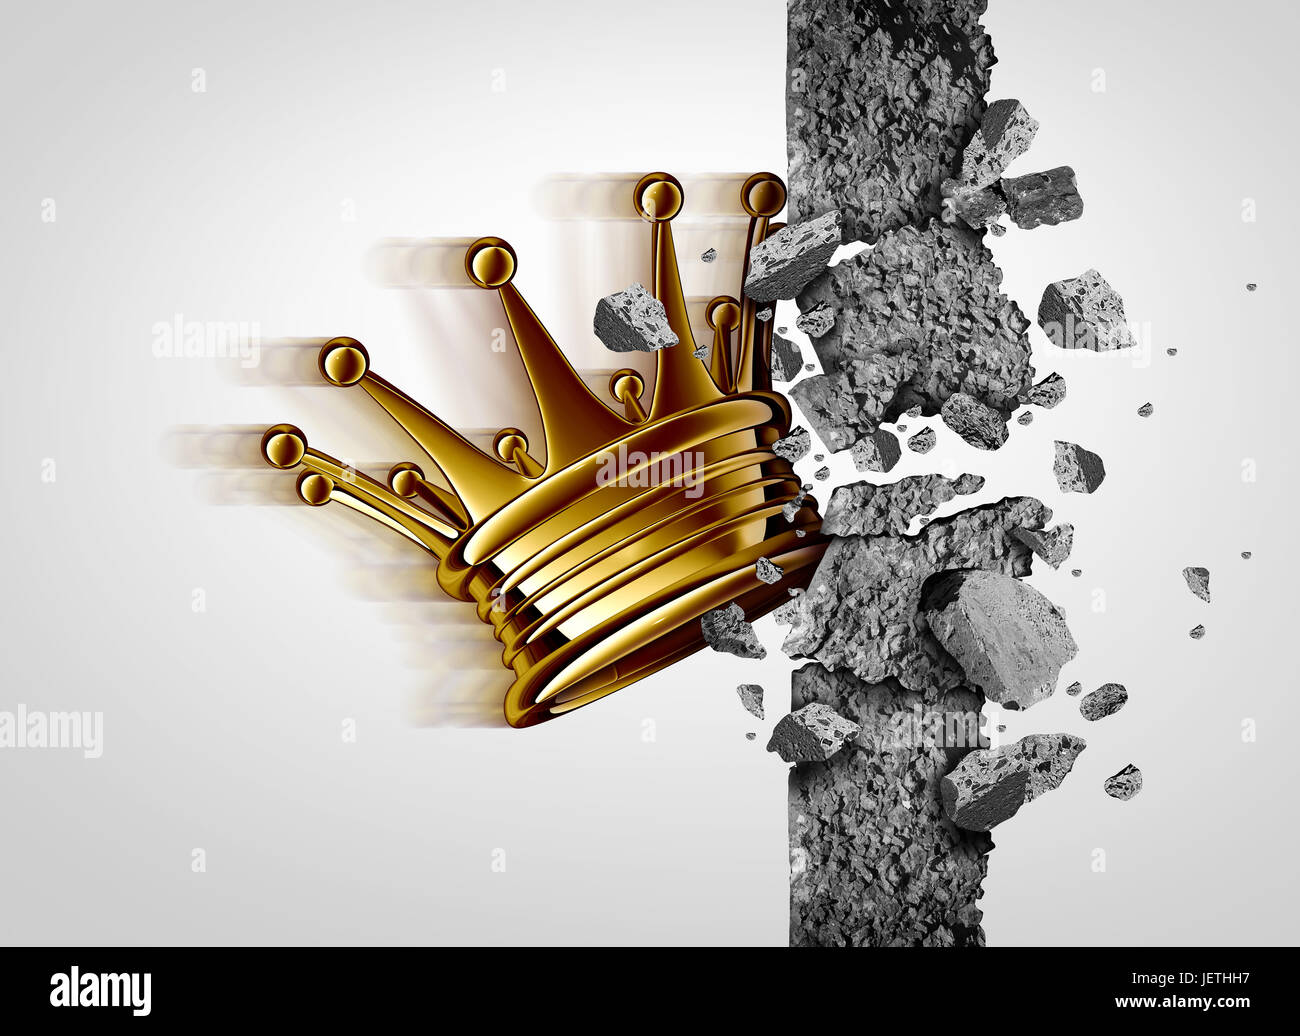 Breakthrough leadership business concept as a king crown breaking through a cement wall as a success and strong leader metaphor. Stock Photo